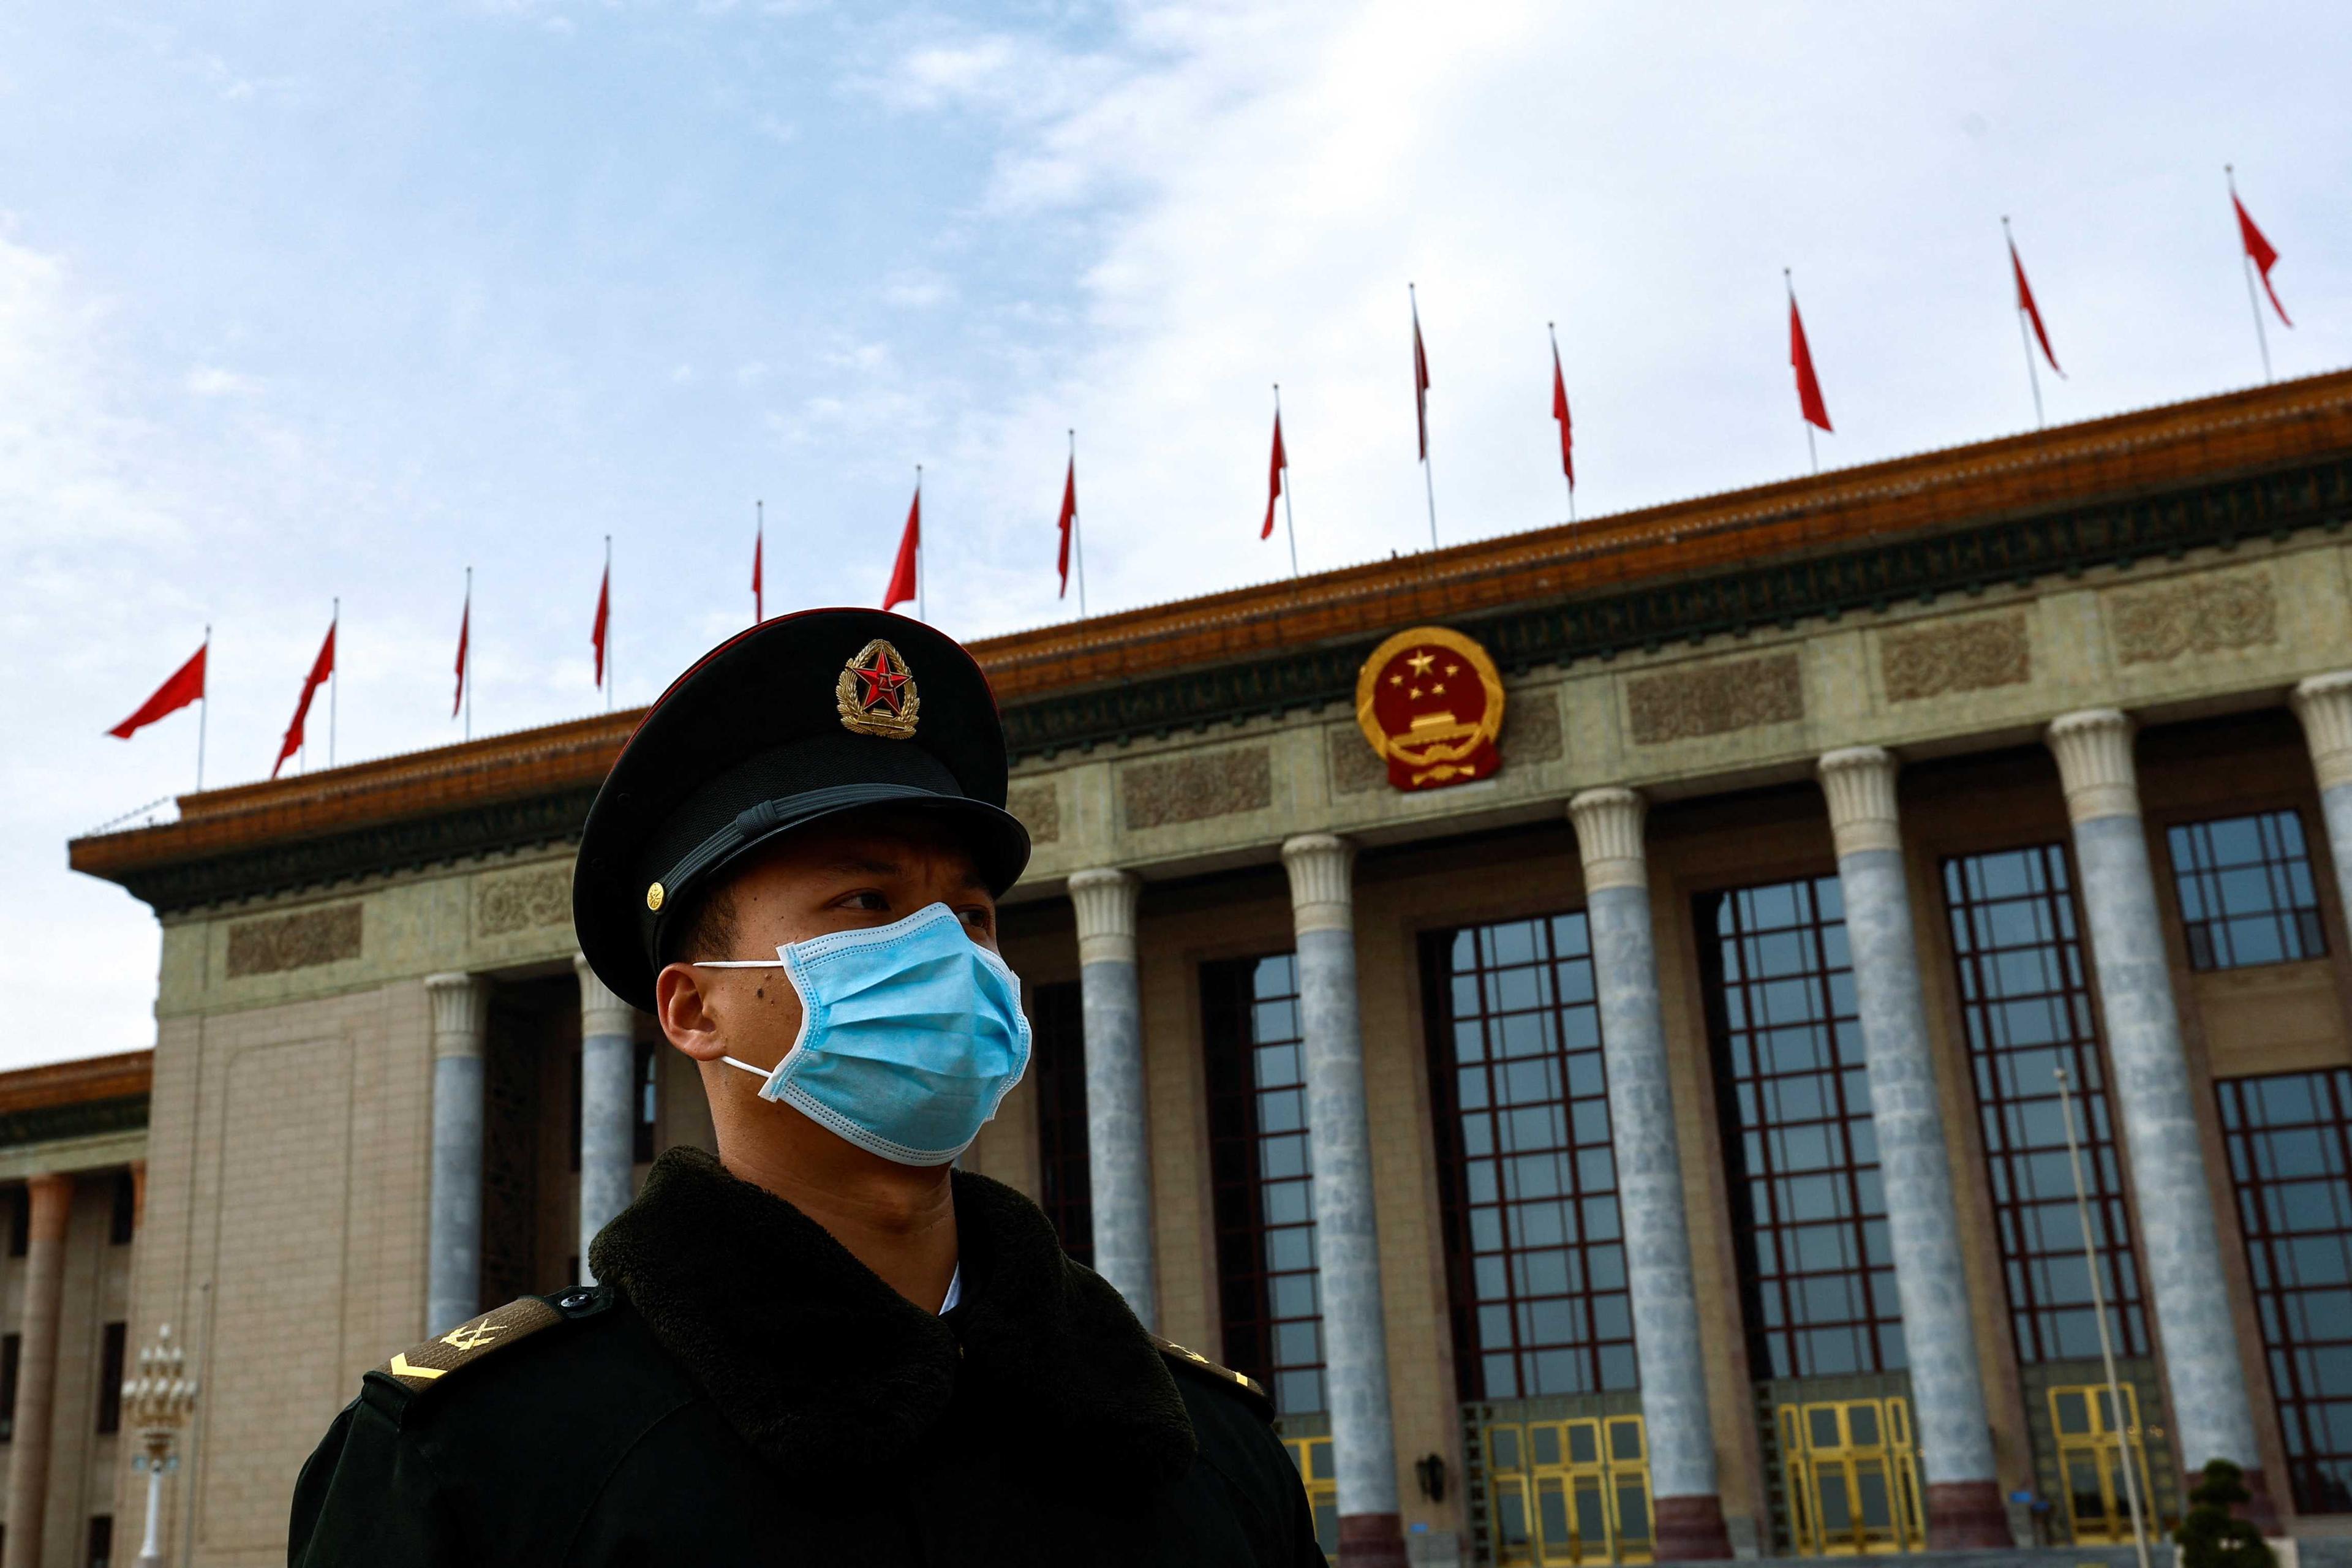 A paramilitary police officer stands guard outside the Great Hall of the People, in Beijing, China March 13. Photo: Reuters